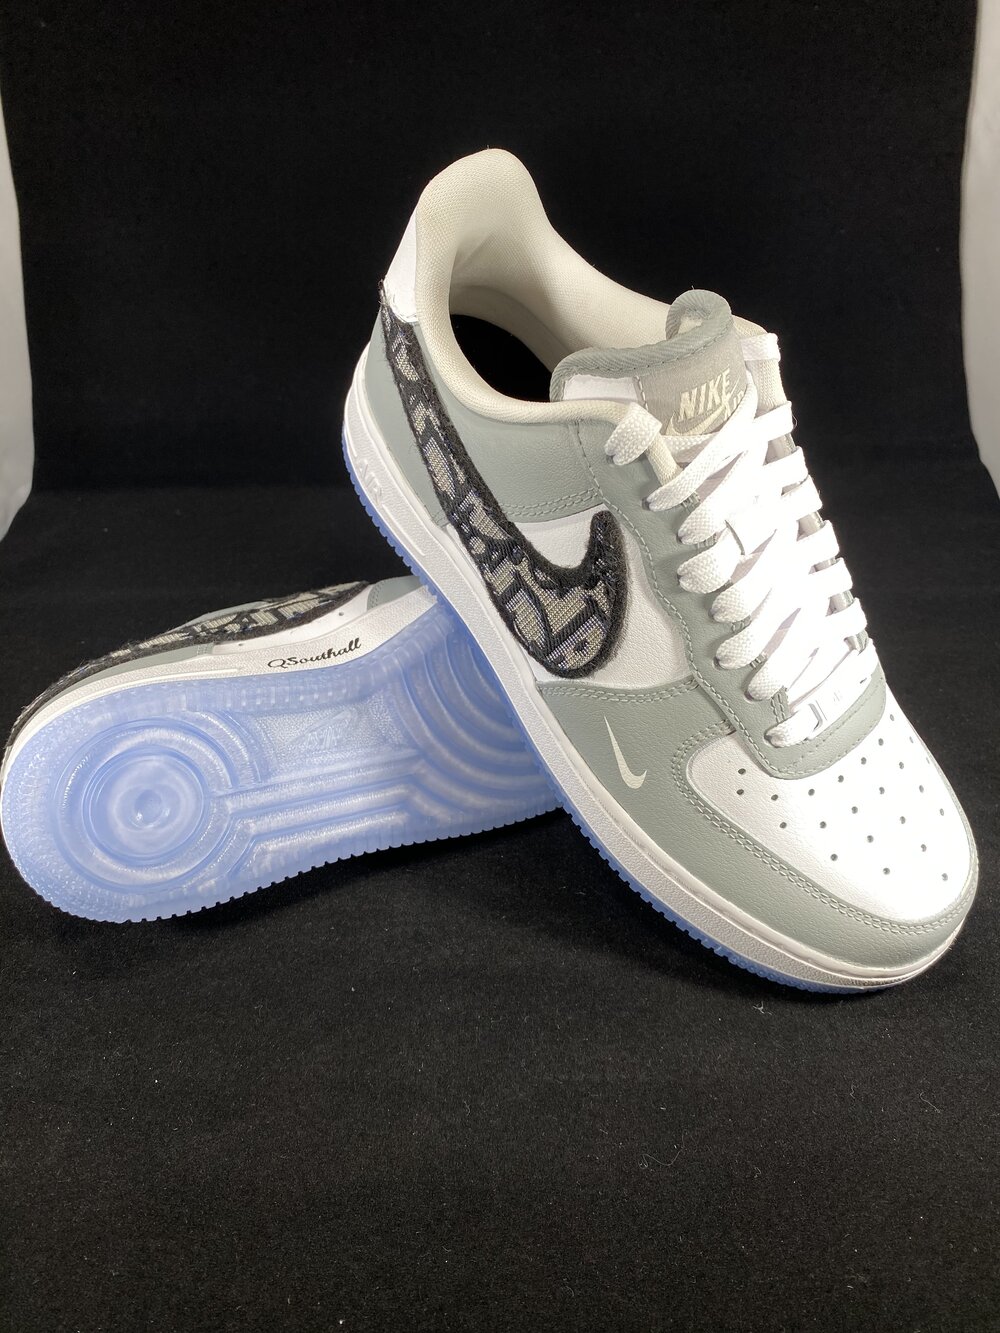 Nike By You Air Force 1 Low Dior Platinum Grey CT3761-991 Men's Size 8.5  Shoes